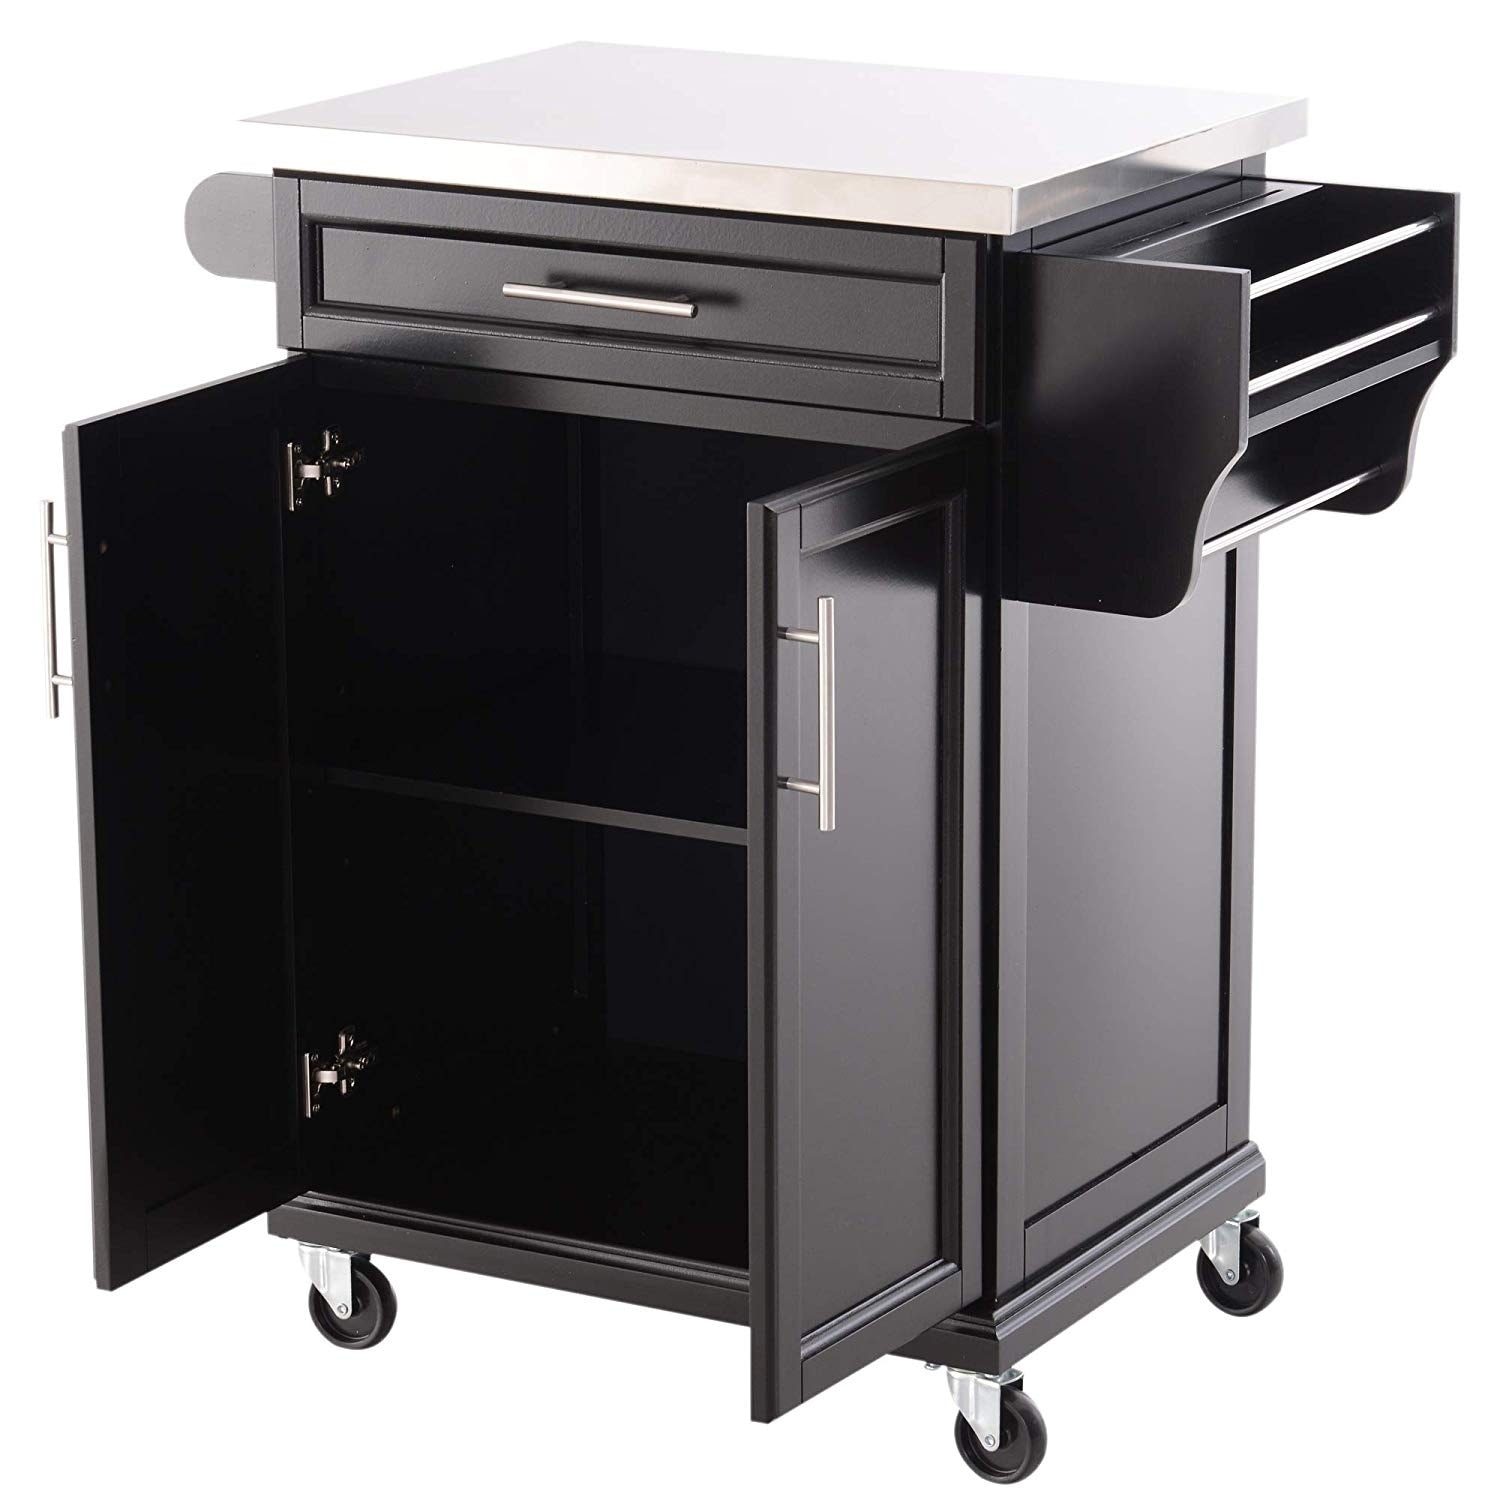 Homcom Wood Stainless Steel Multi Storage Rolling Kitchen Island Utility Cart With Wheels Black On Sale Overstock 23056738